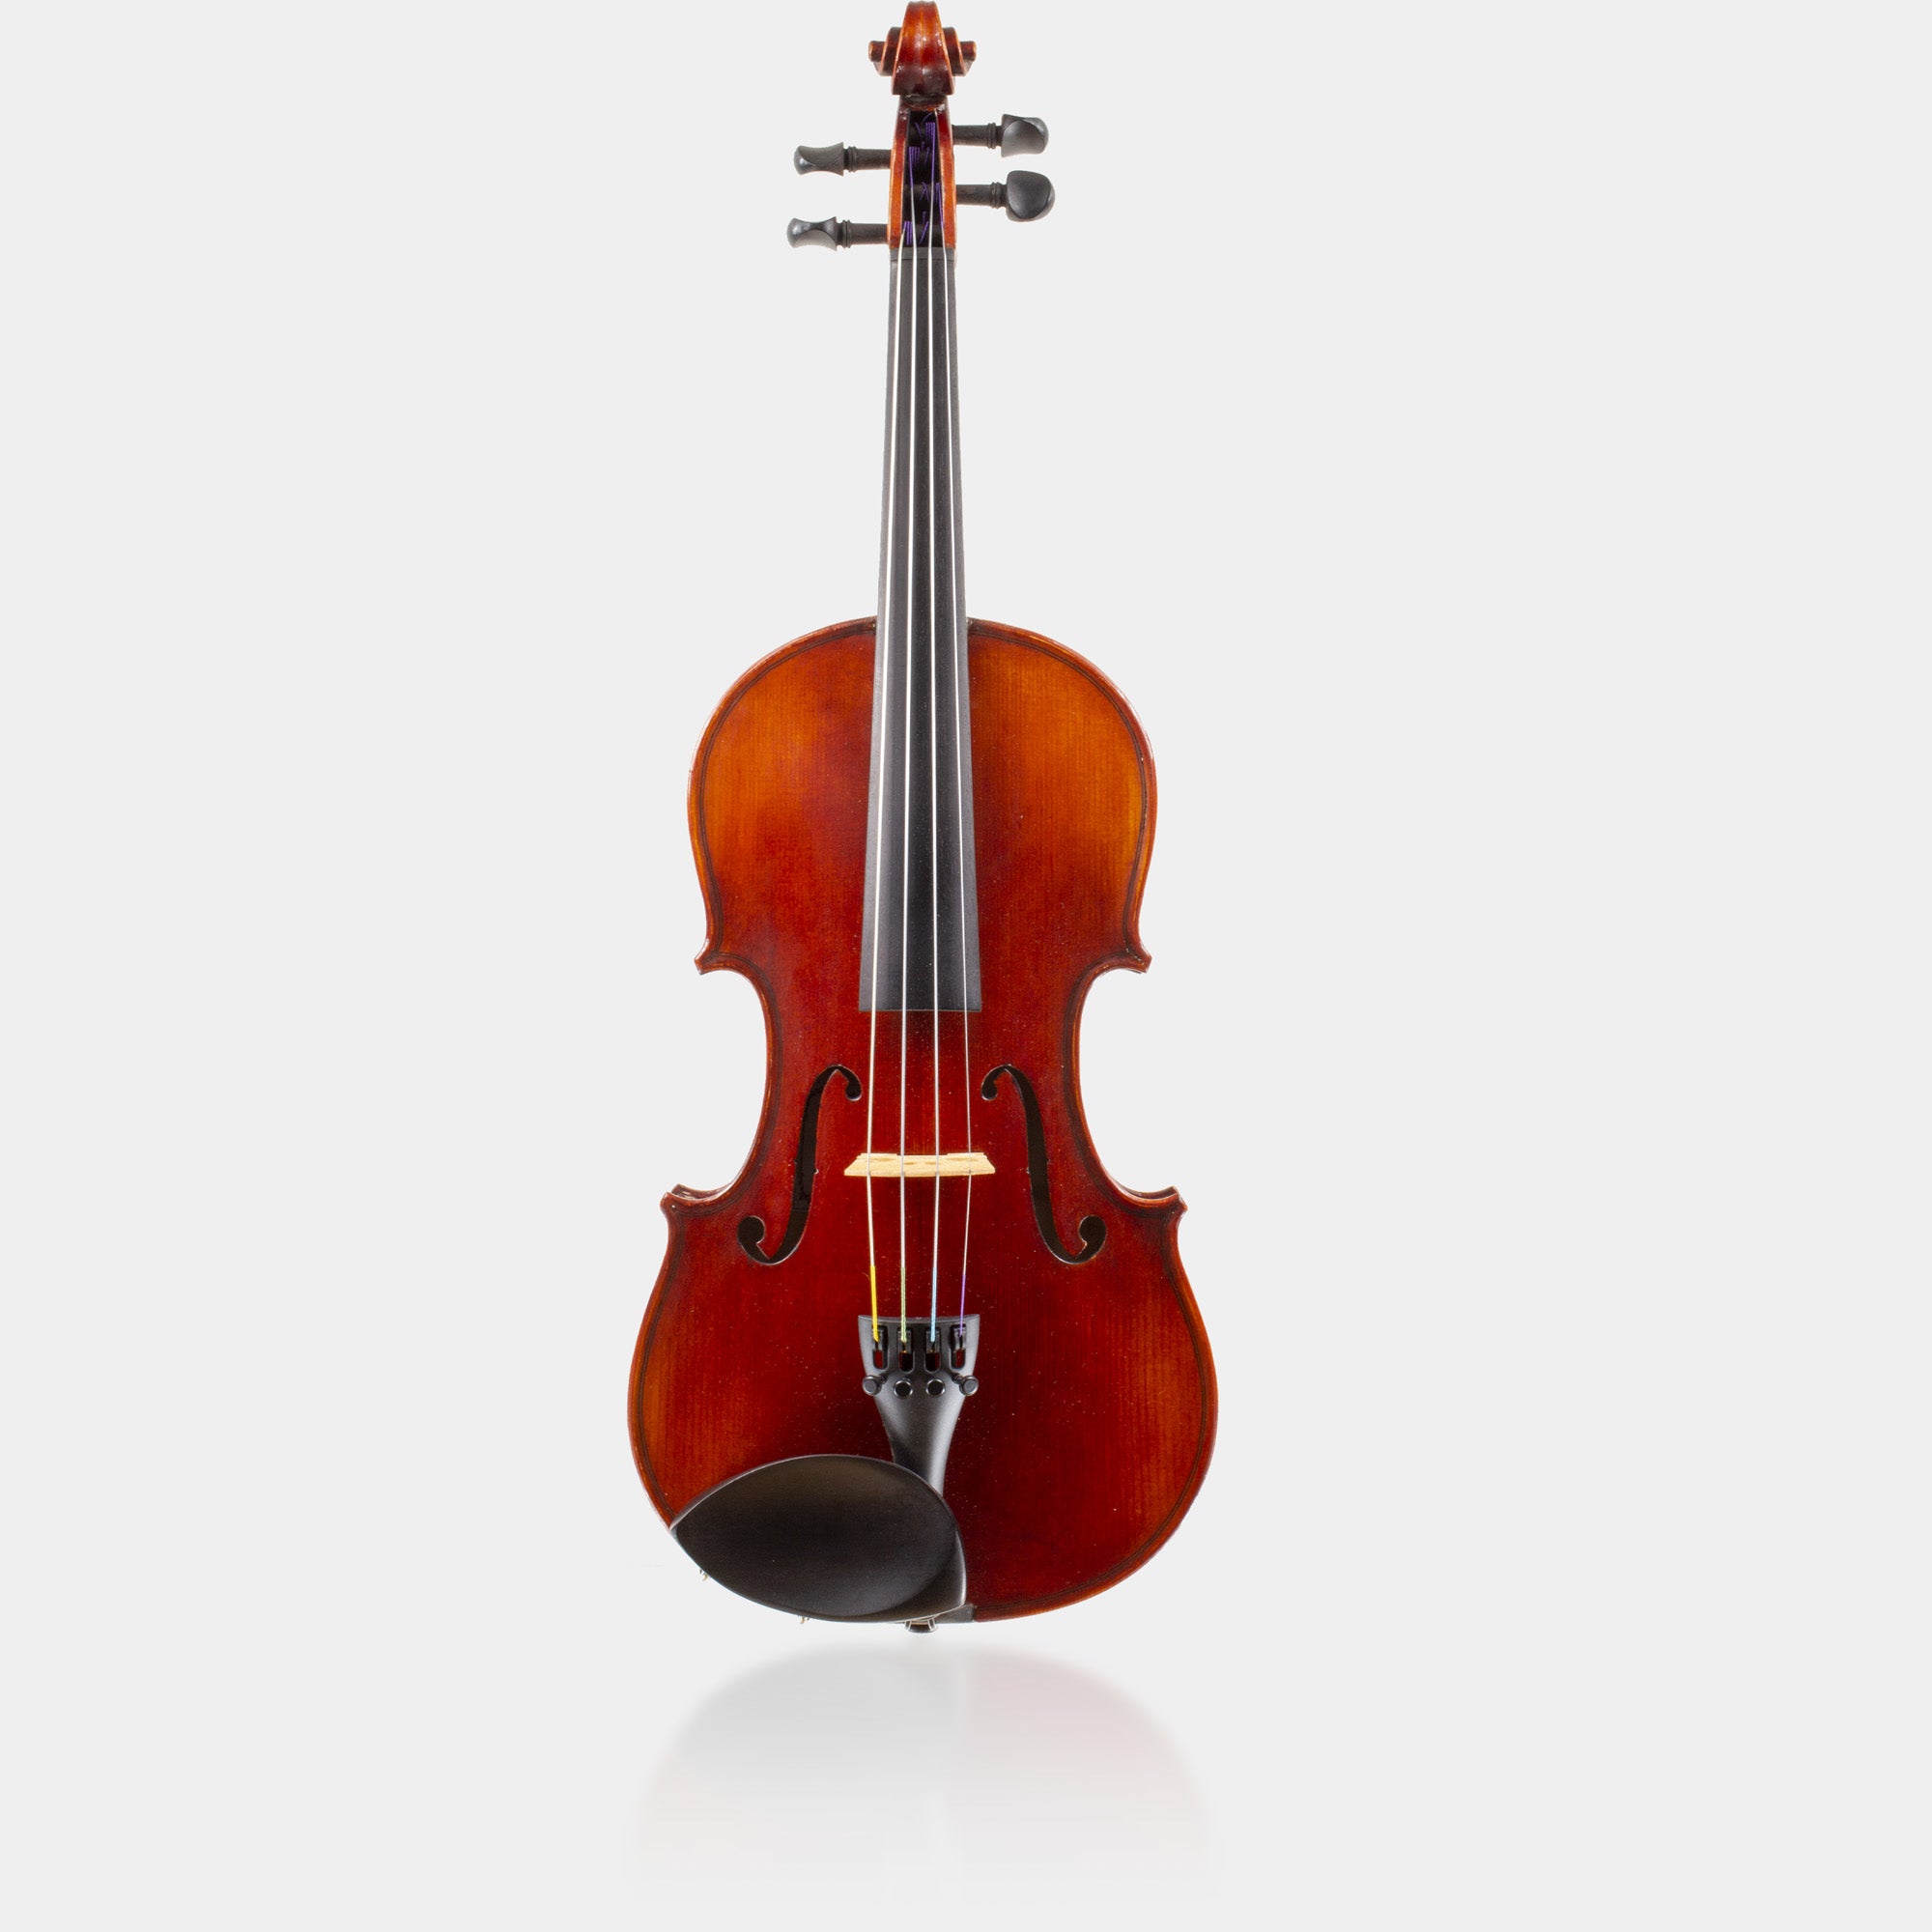 Stringers Violin, Viola & Cello Outfits, Instruments, Bows & Cases